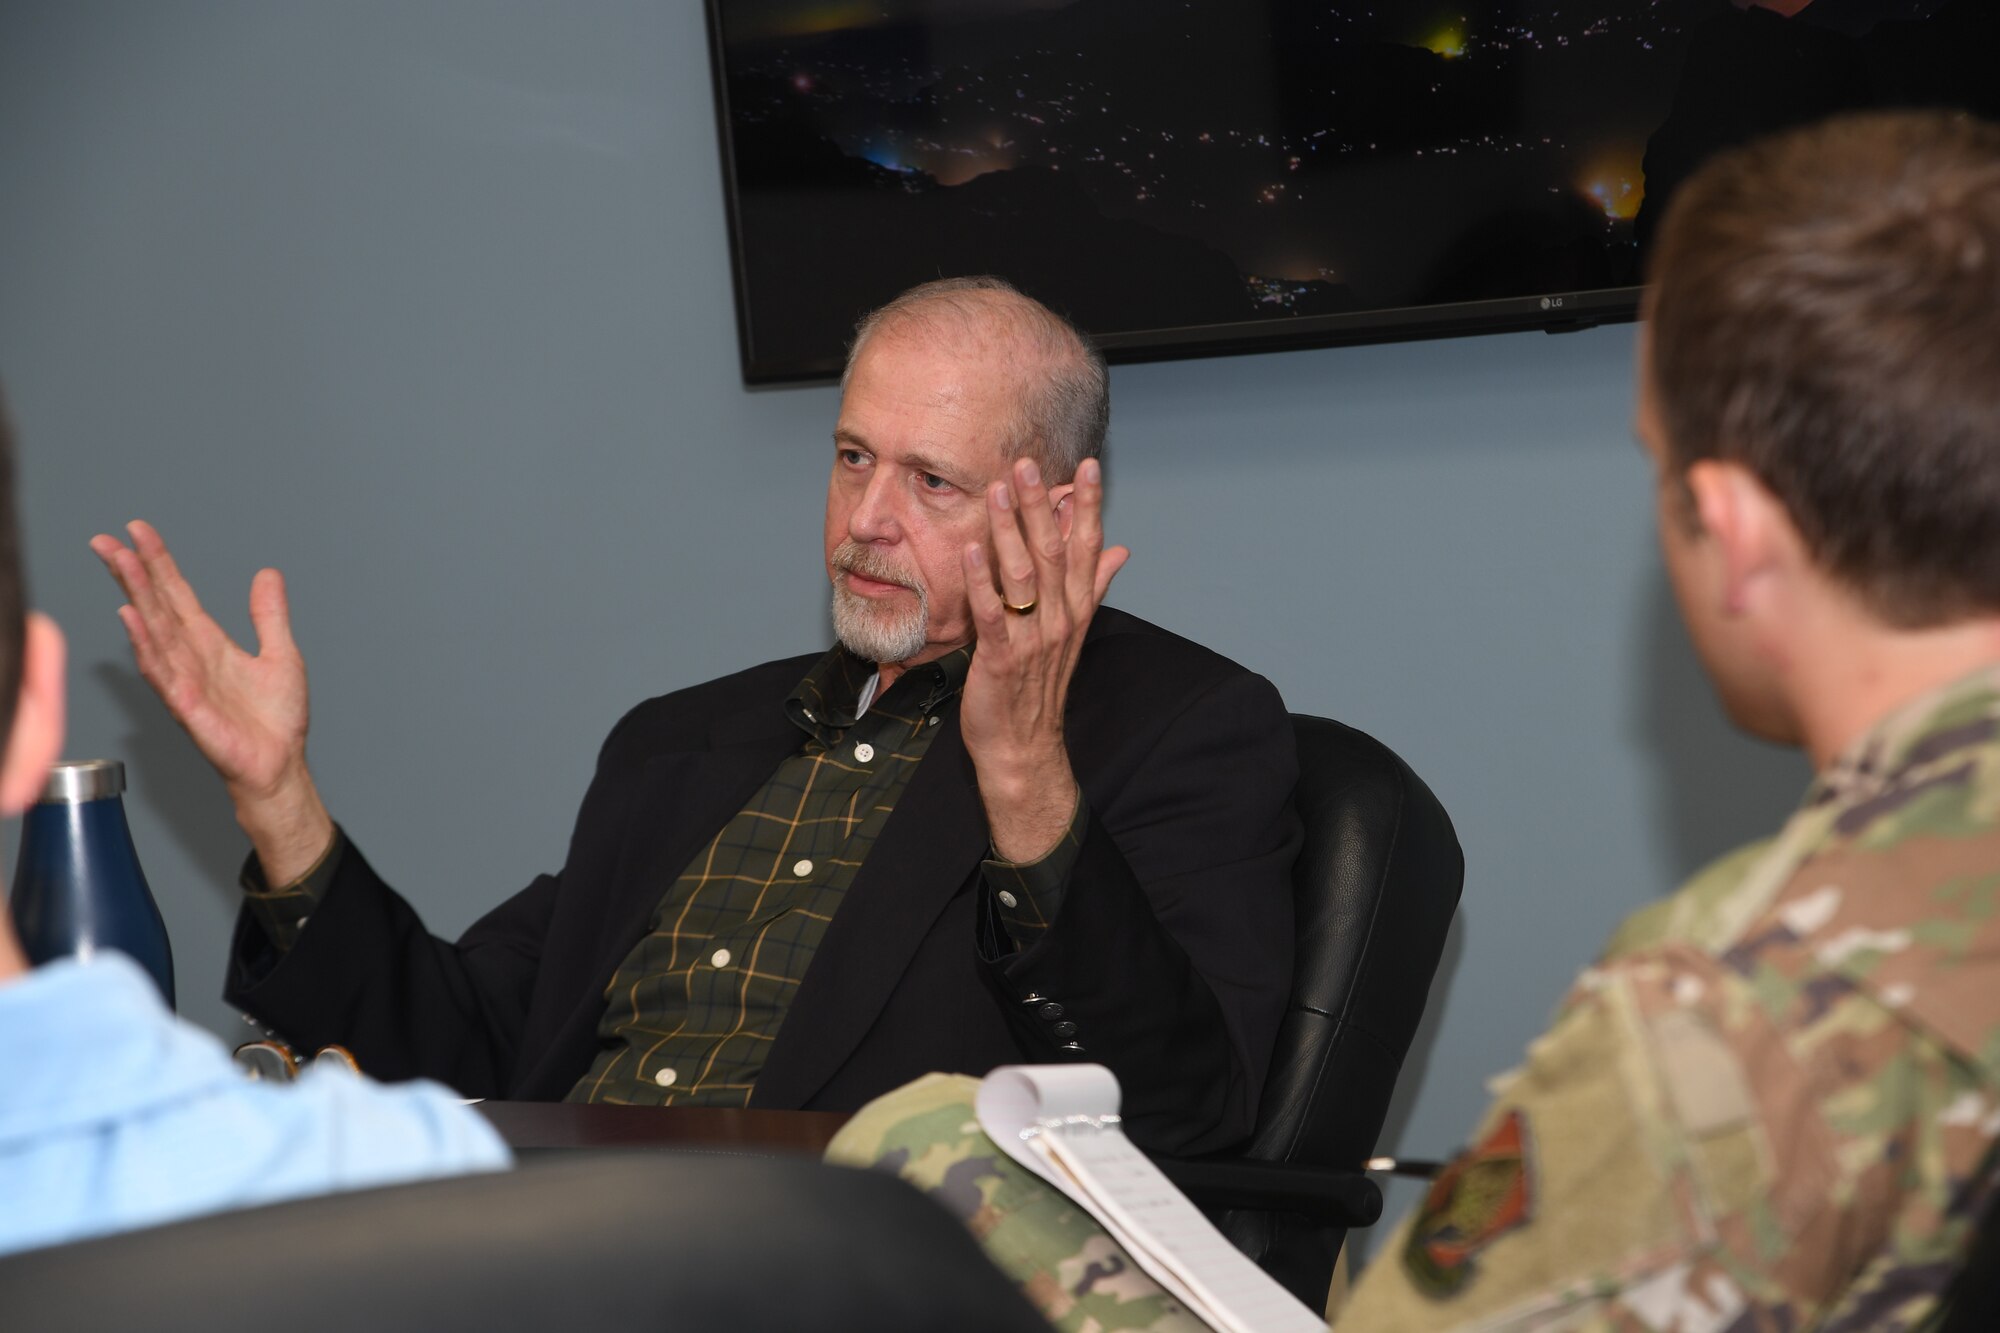 Dr. Timothy Strongin, USAF, Col, Retired and a pioneer Air Force Aviation Psychologist was on hand to provide his thoughts to class